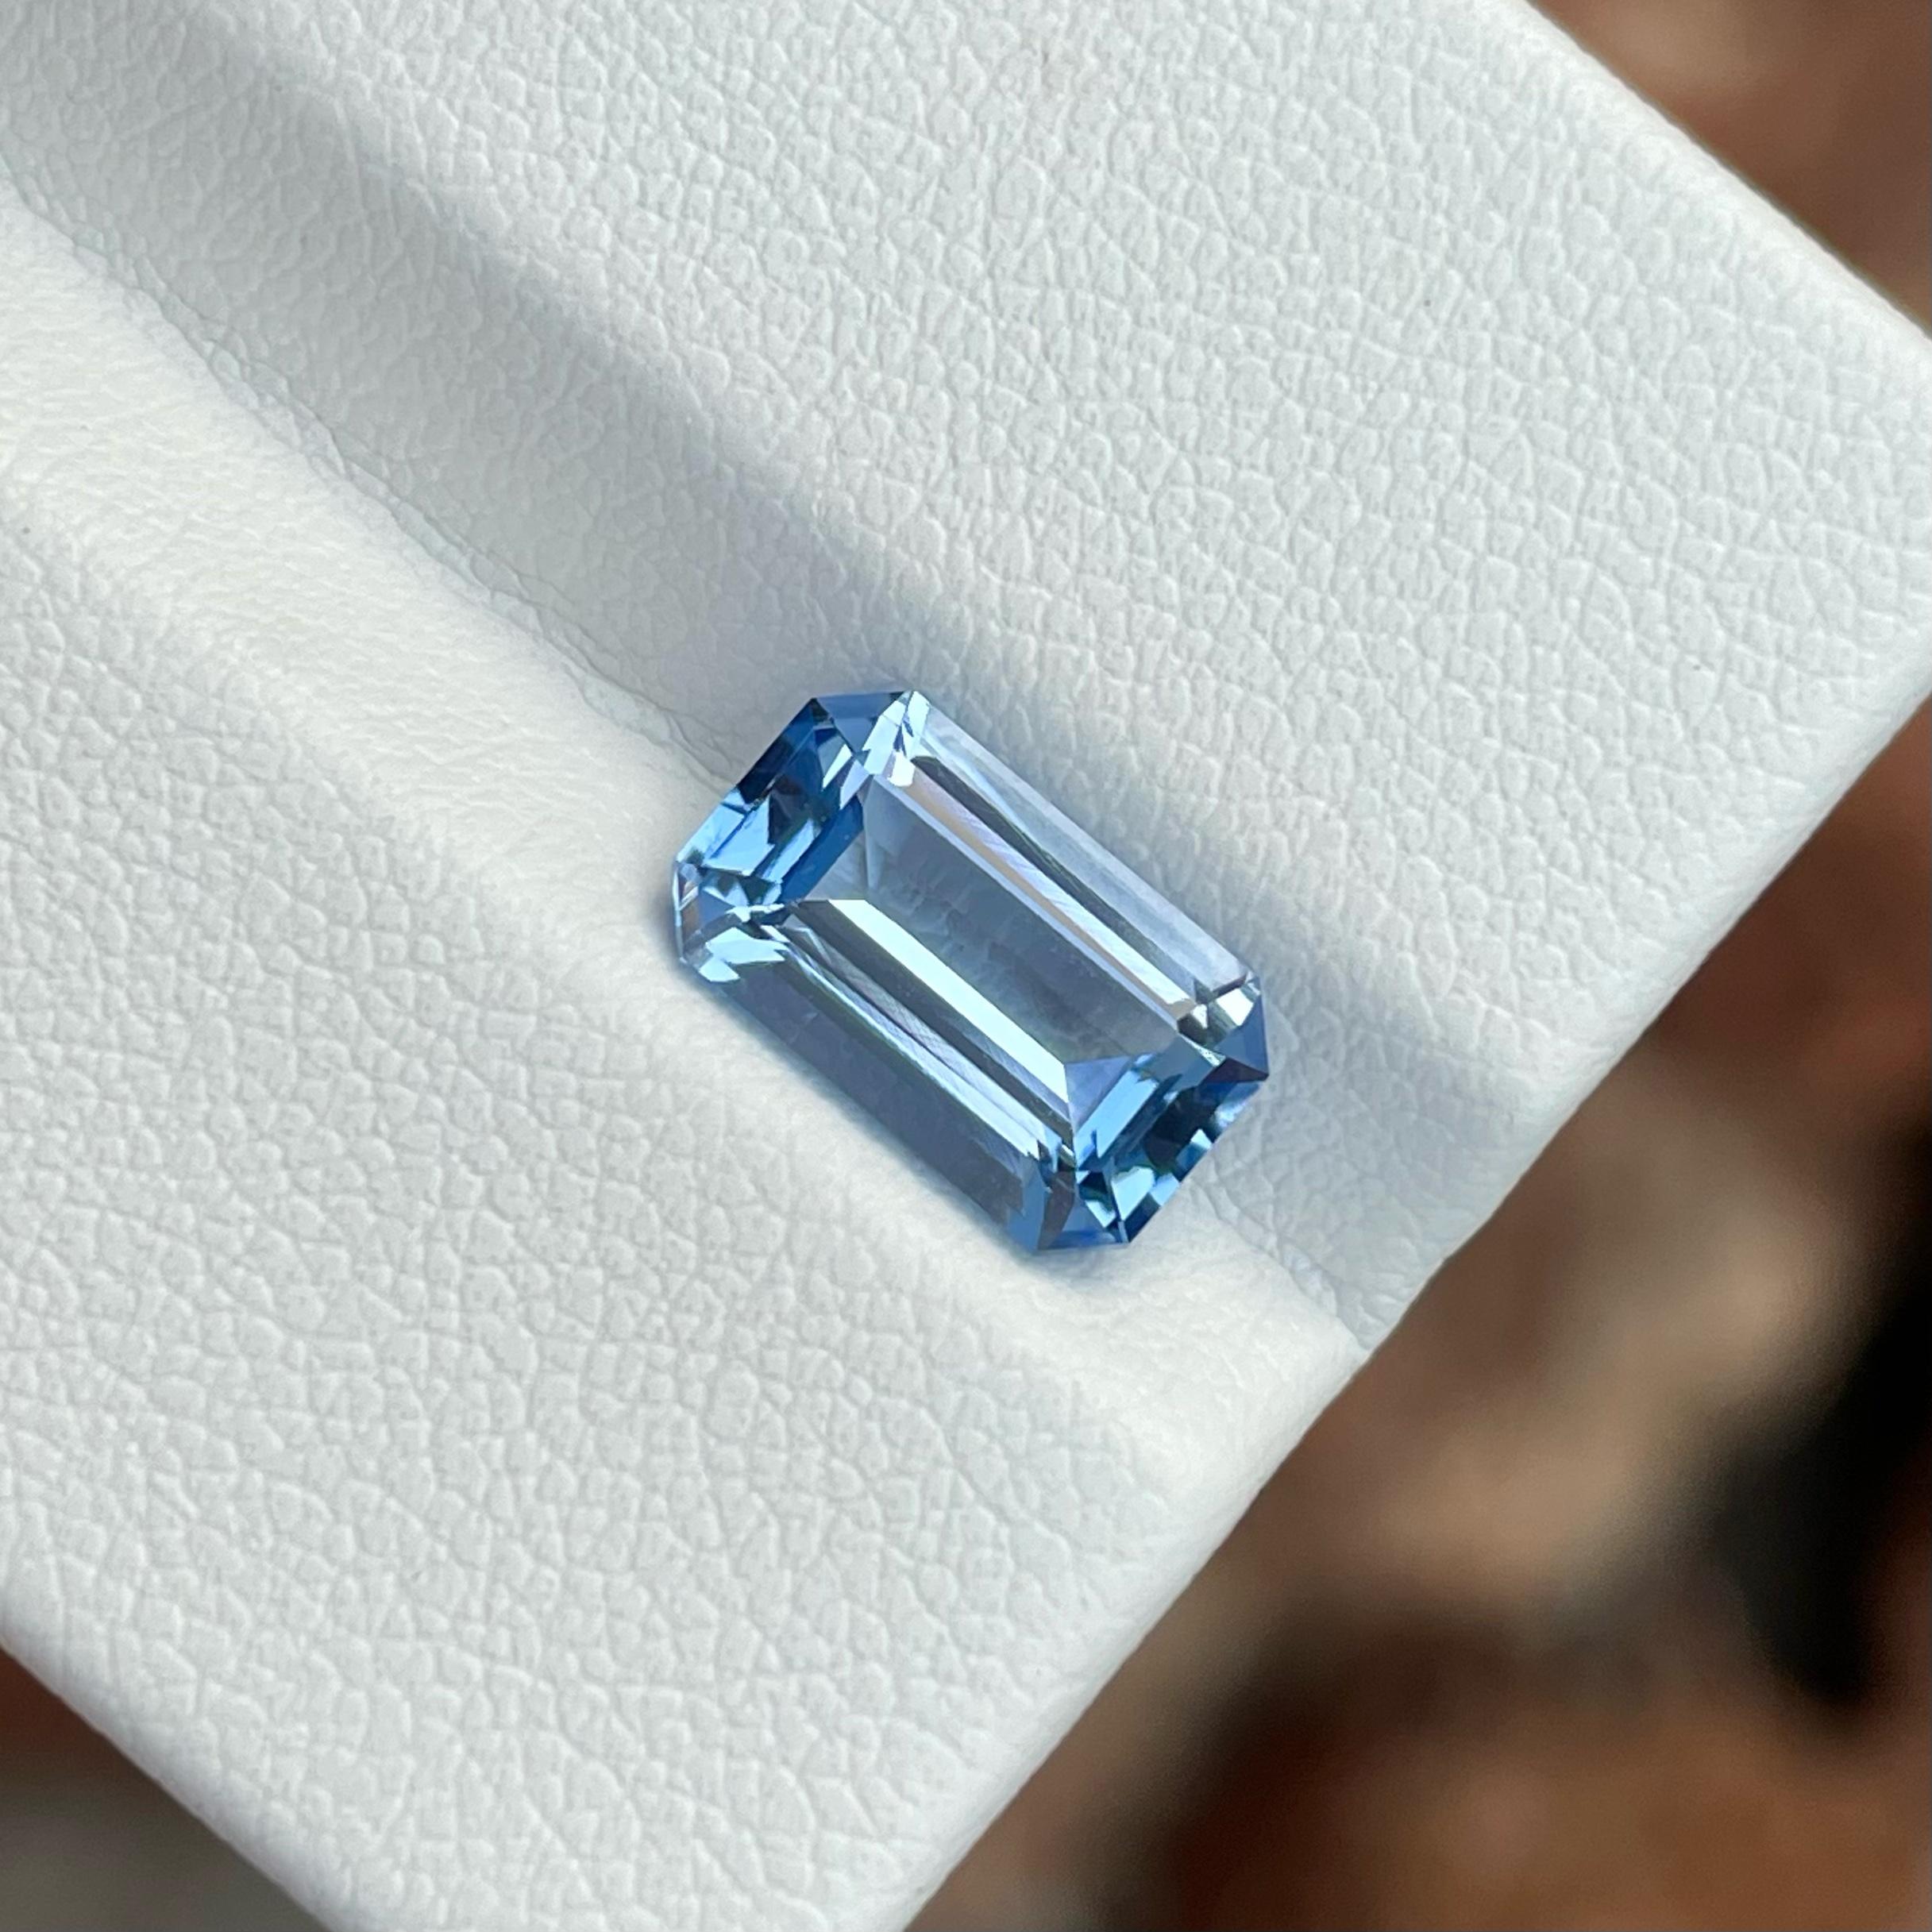 Weight 2.55 carats 
Dimensions 11.1x6.7x4.8 mm 
Treatment Irradiated 
Clarity Loupe Clean 
Origin Pakistan 
Shape Octagon 
Cut Emerald


Crafted with the utmost attention to detail, our Aquamarine Gemstone jewelry pieces are designed to stand the